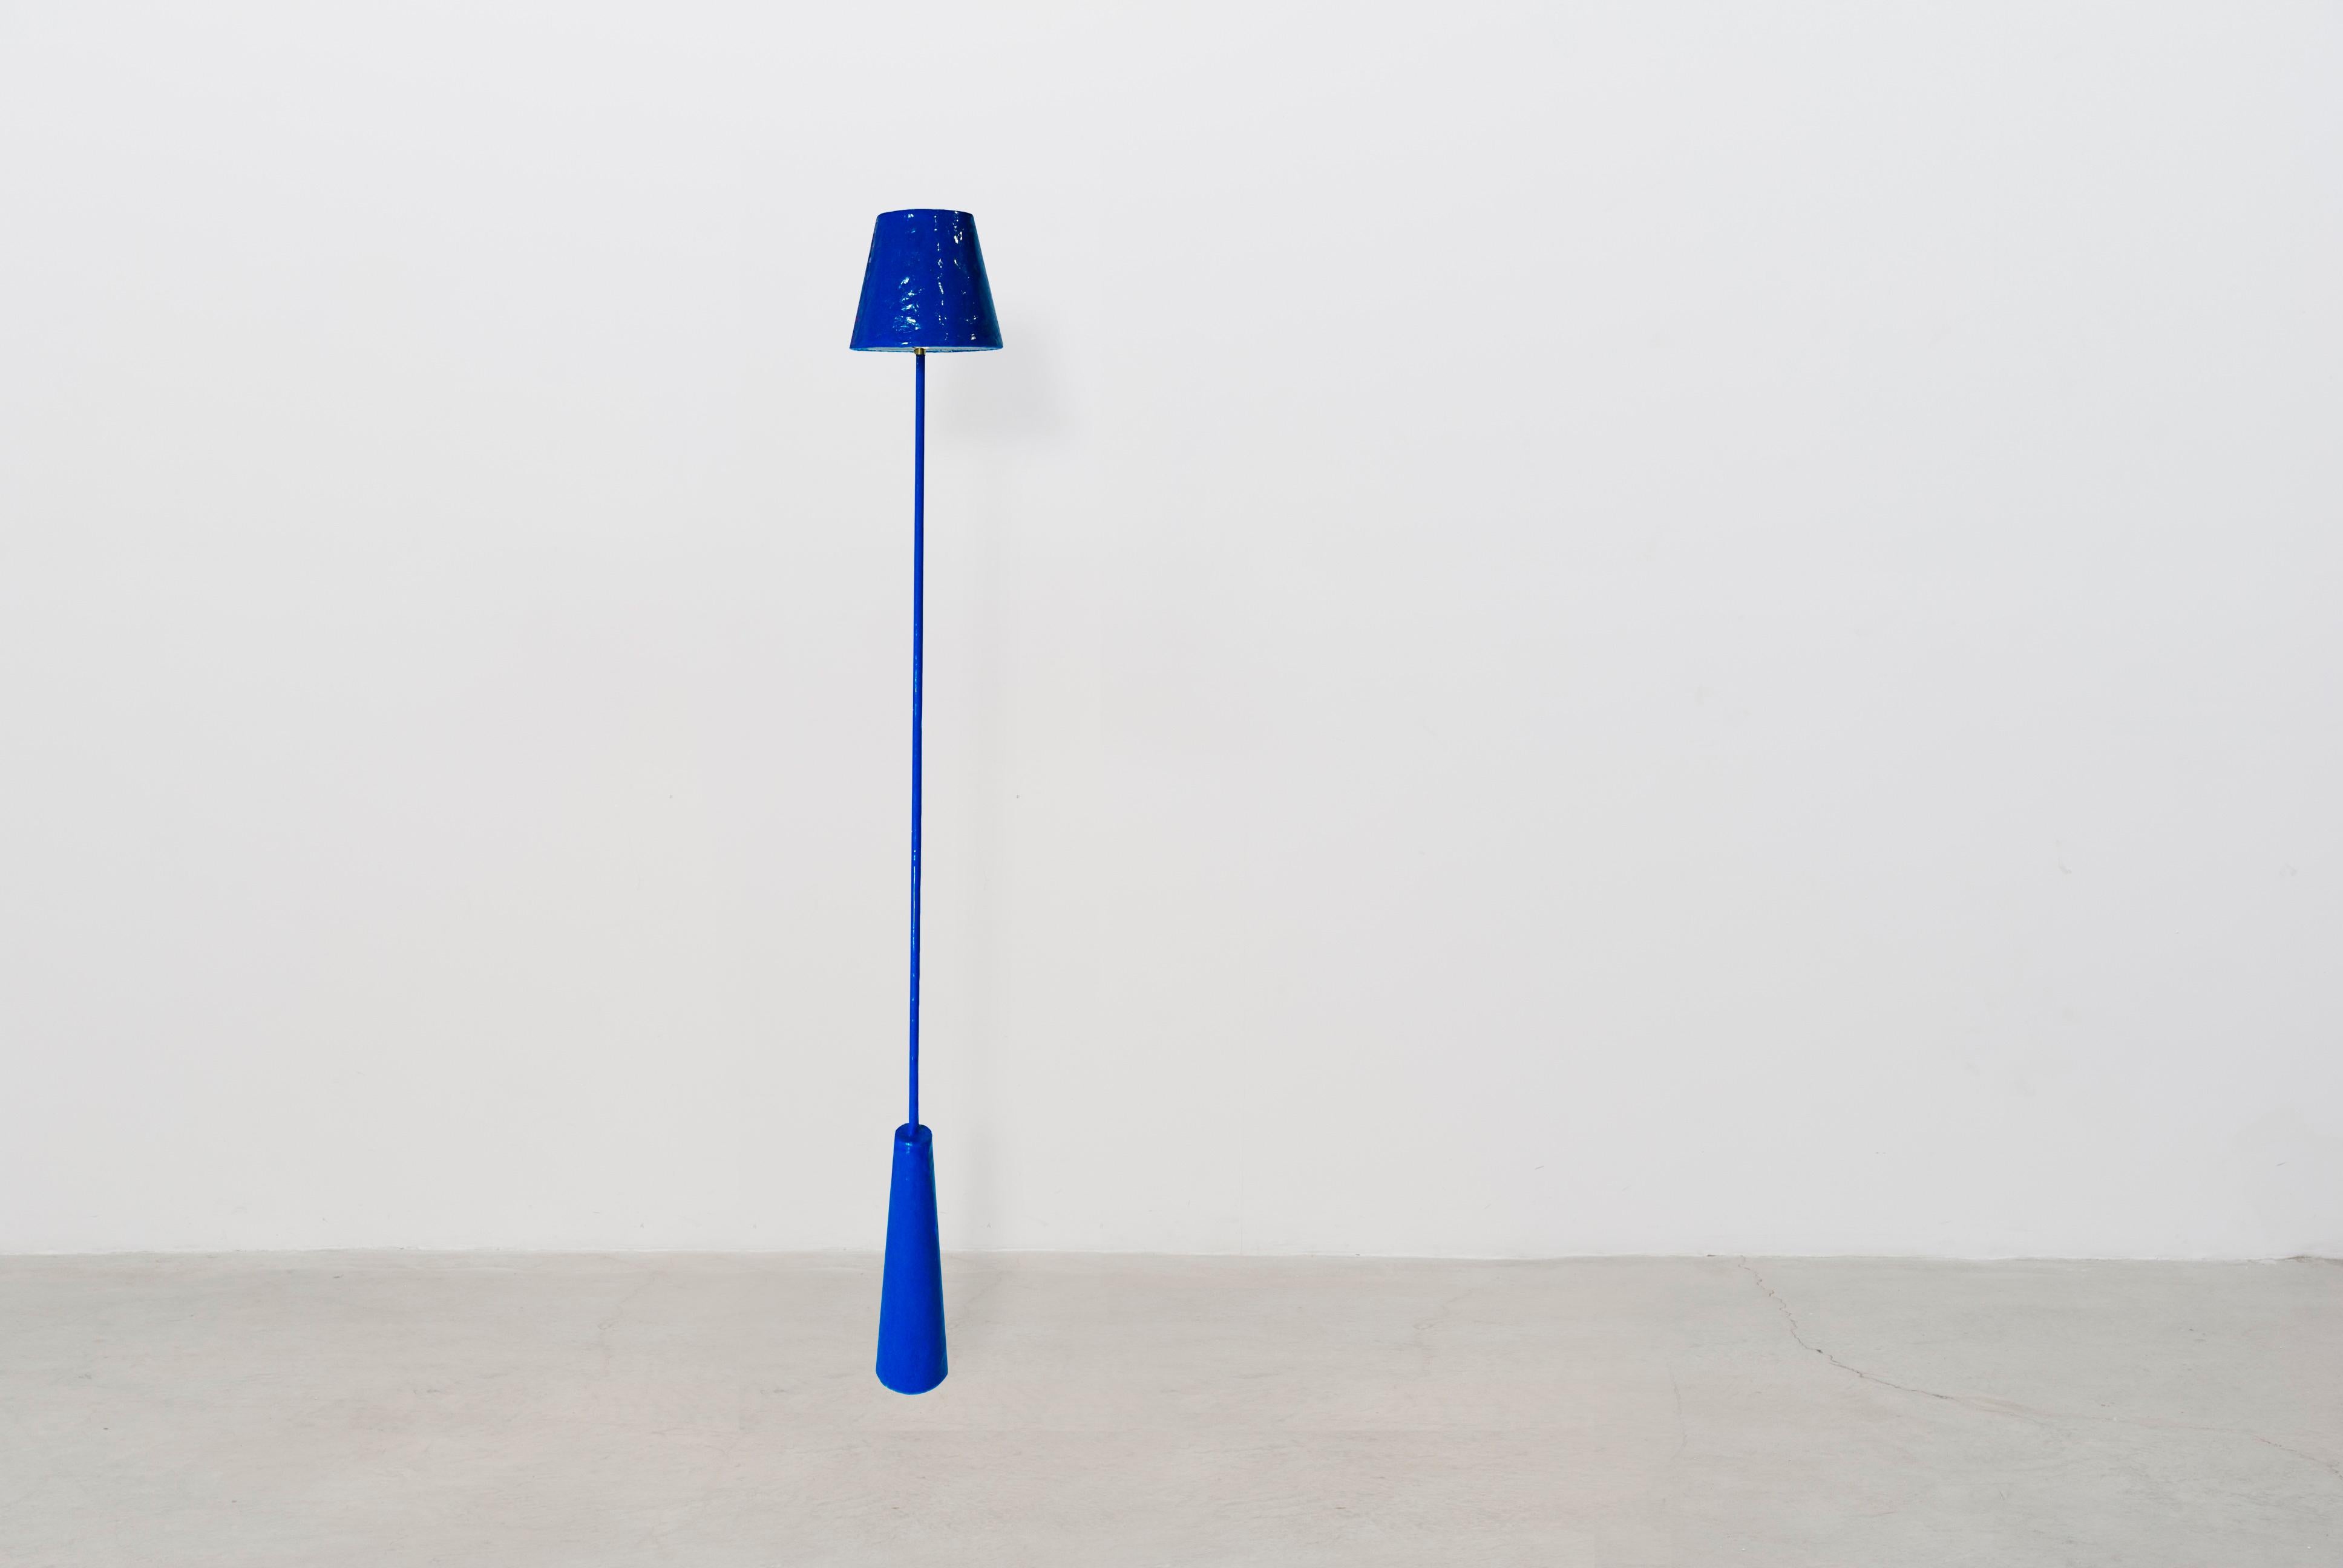 This Giacometti floor lamp by Bailey Fontaine is inspired by the works of Alberto Giacometti. The lamp is sculpted from unconventional materials like paper clay and silicone, which display a rich texture on a biomorphic surface. This minimalistic